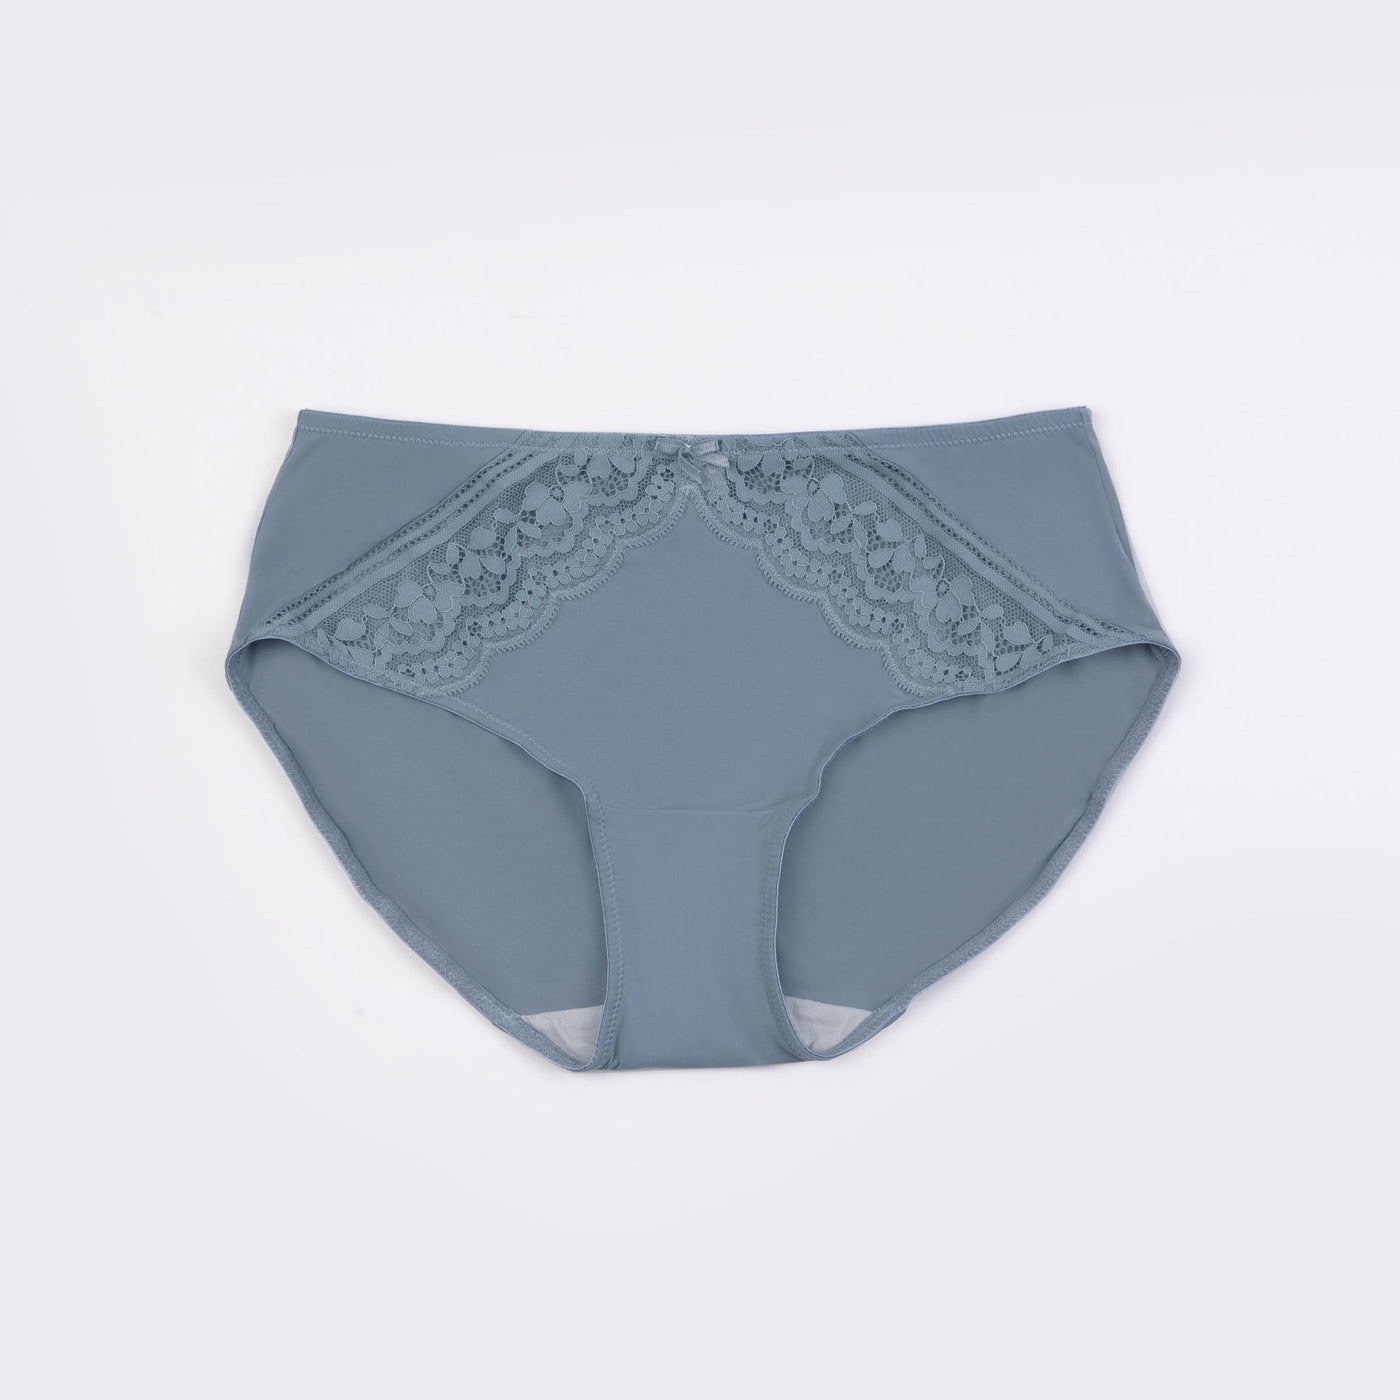 Match Back Cooling Lace Brief Panty – Her own words